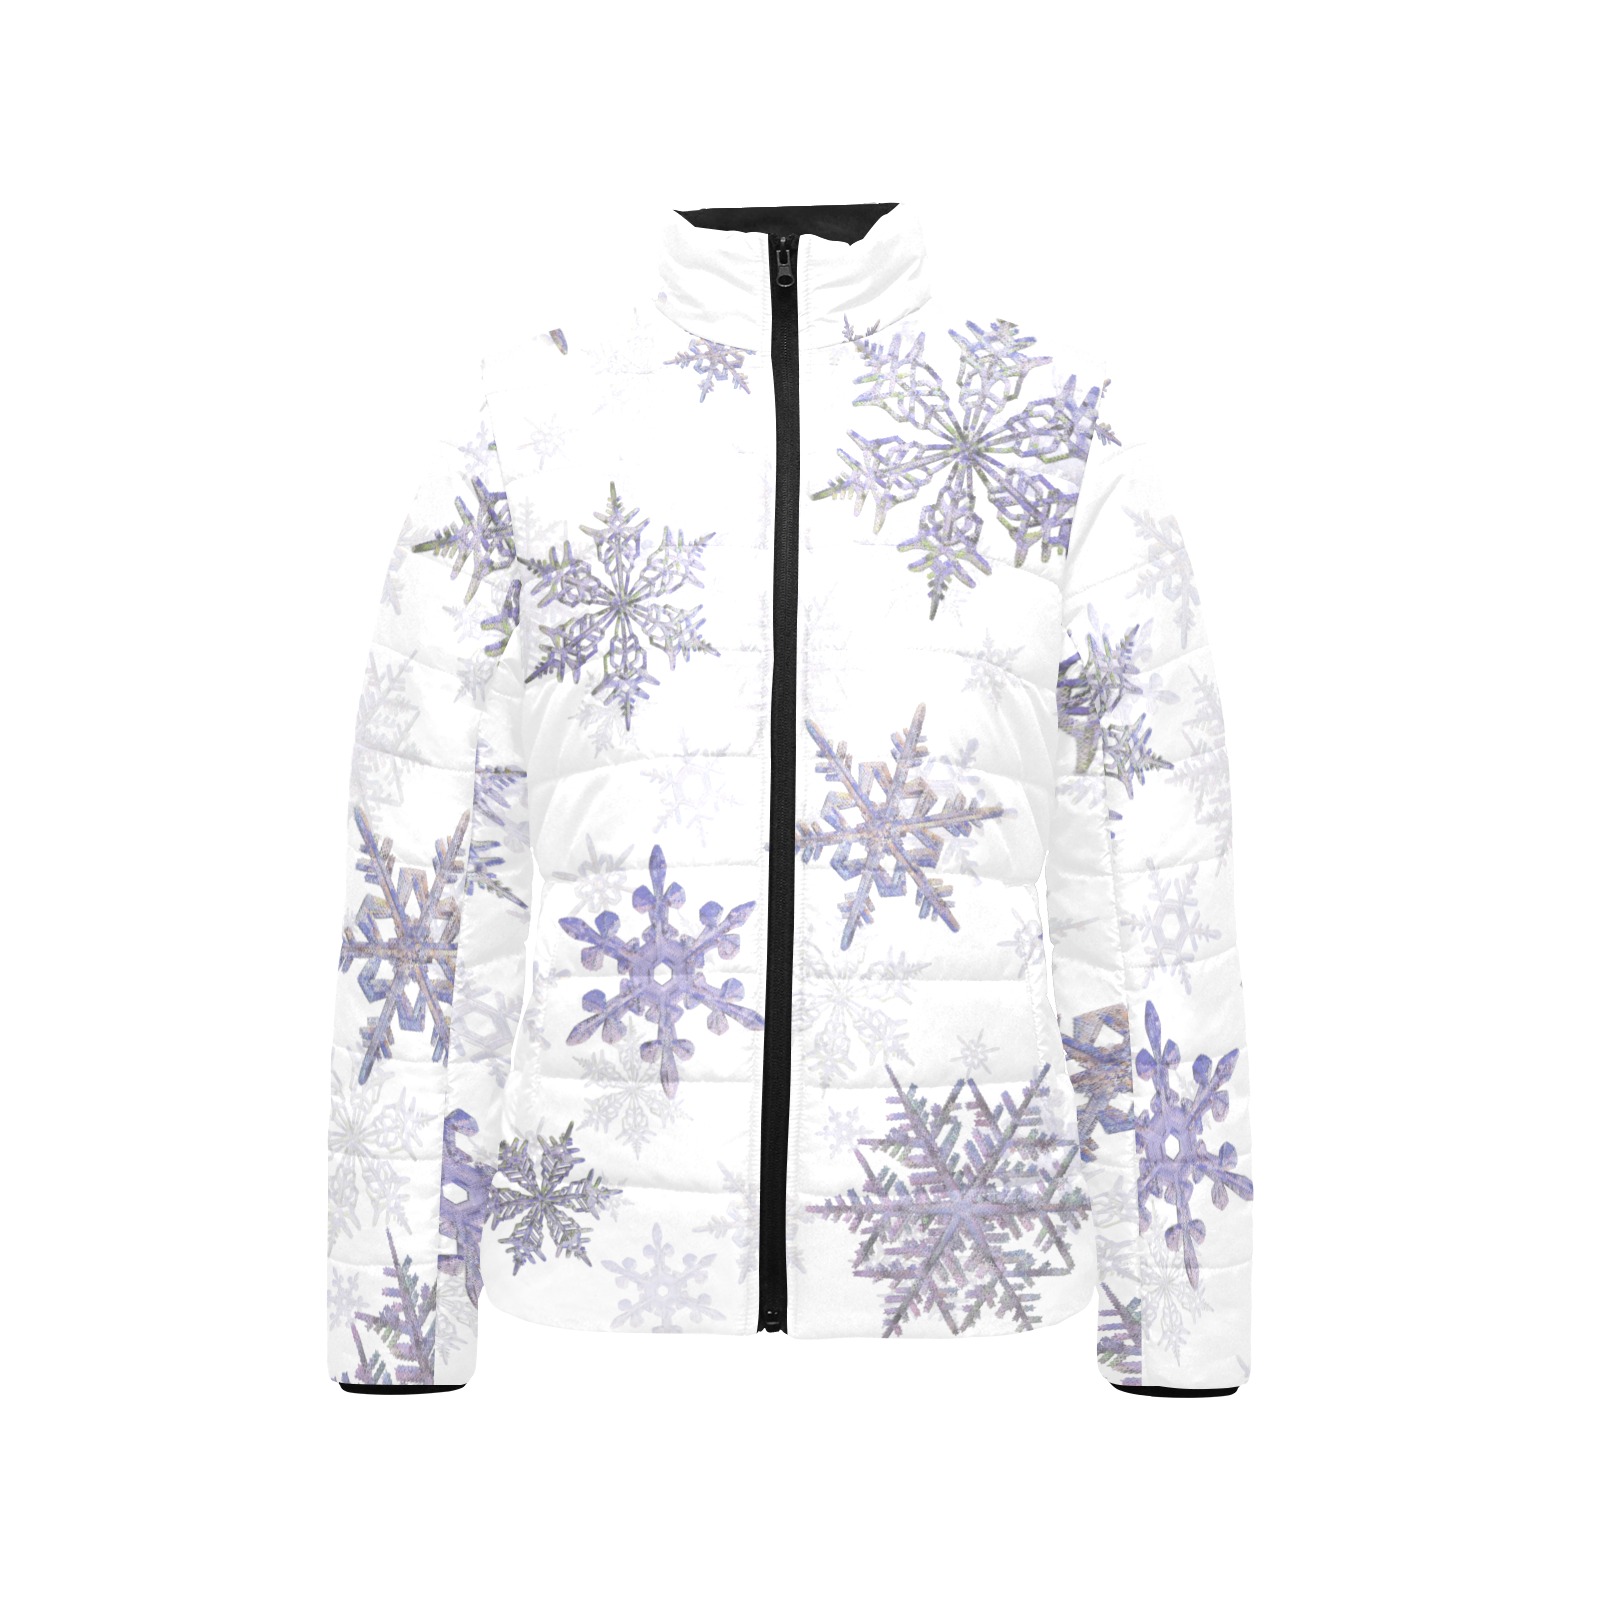 Snowflakes Winter Christmas on white Women's Stand Collar Padded Jacket (Model H41)